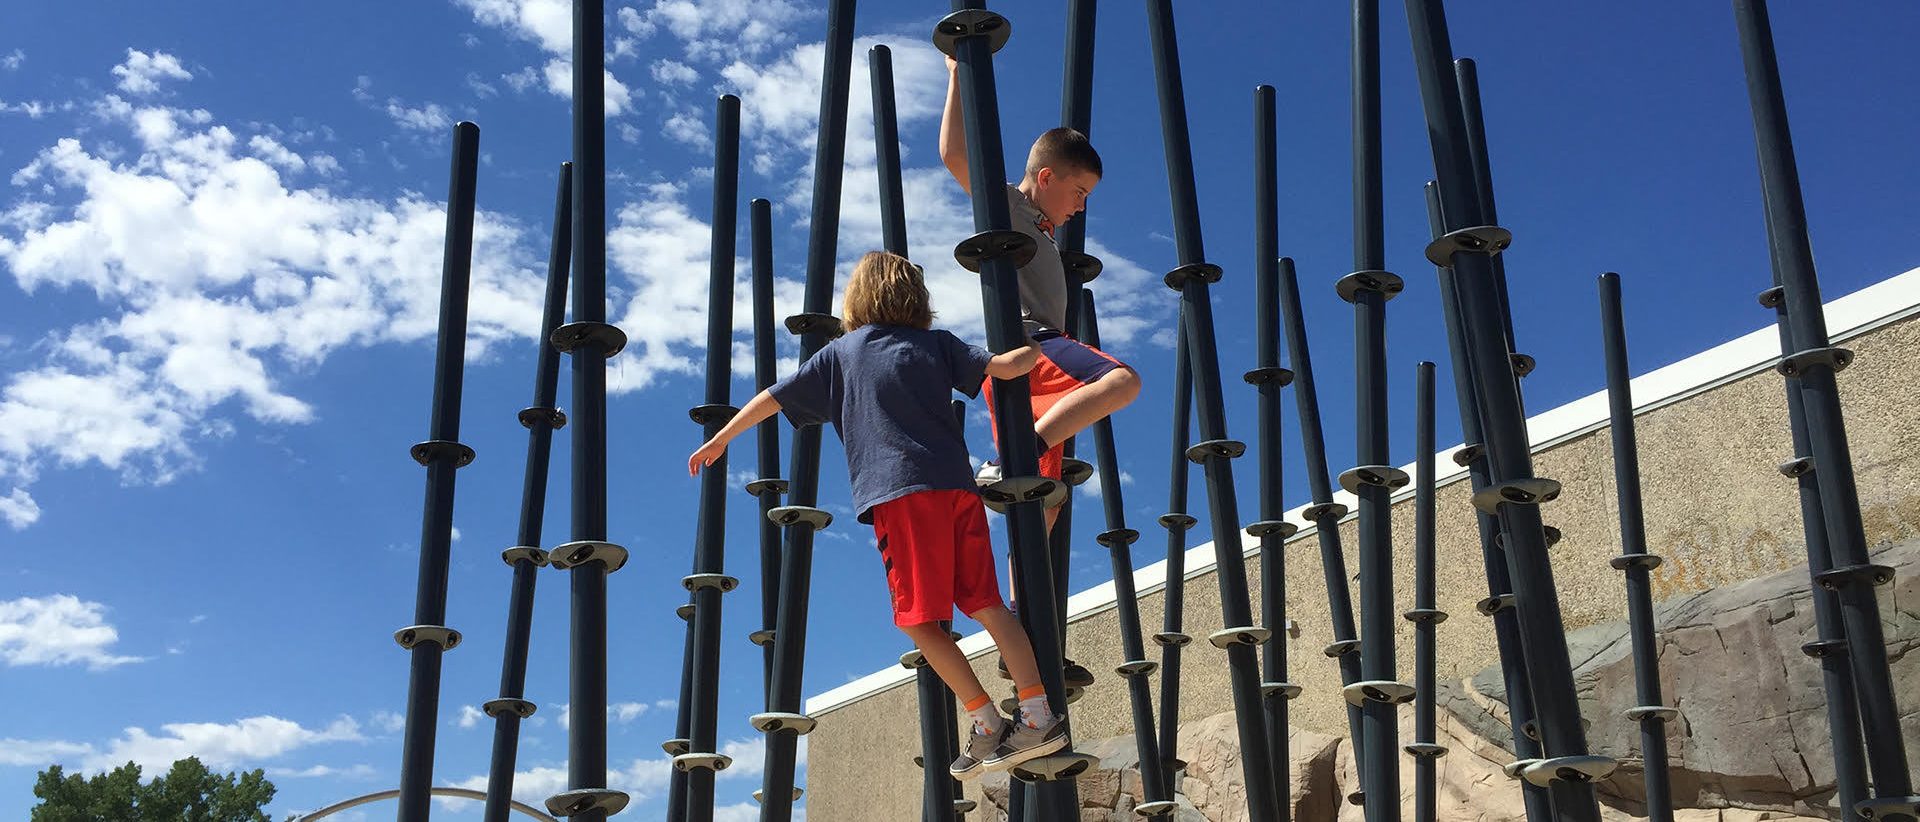 Main myths about Obstacle Challenges in playgrounds, schools and parks